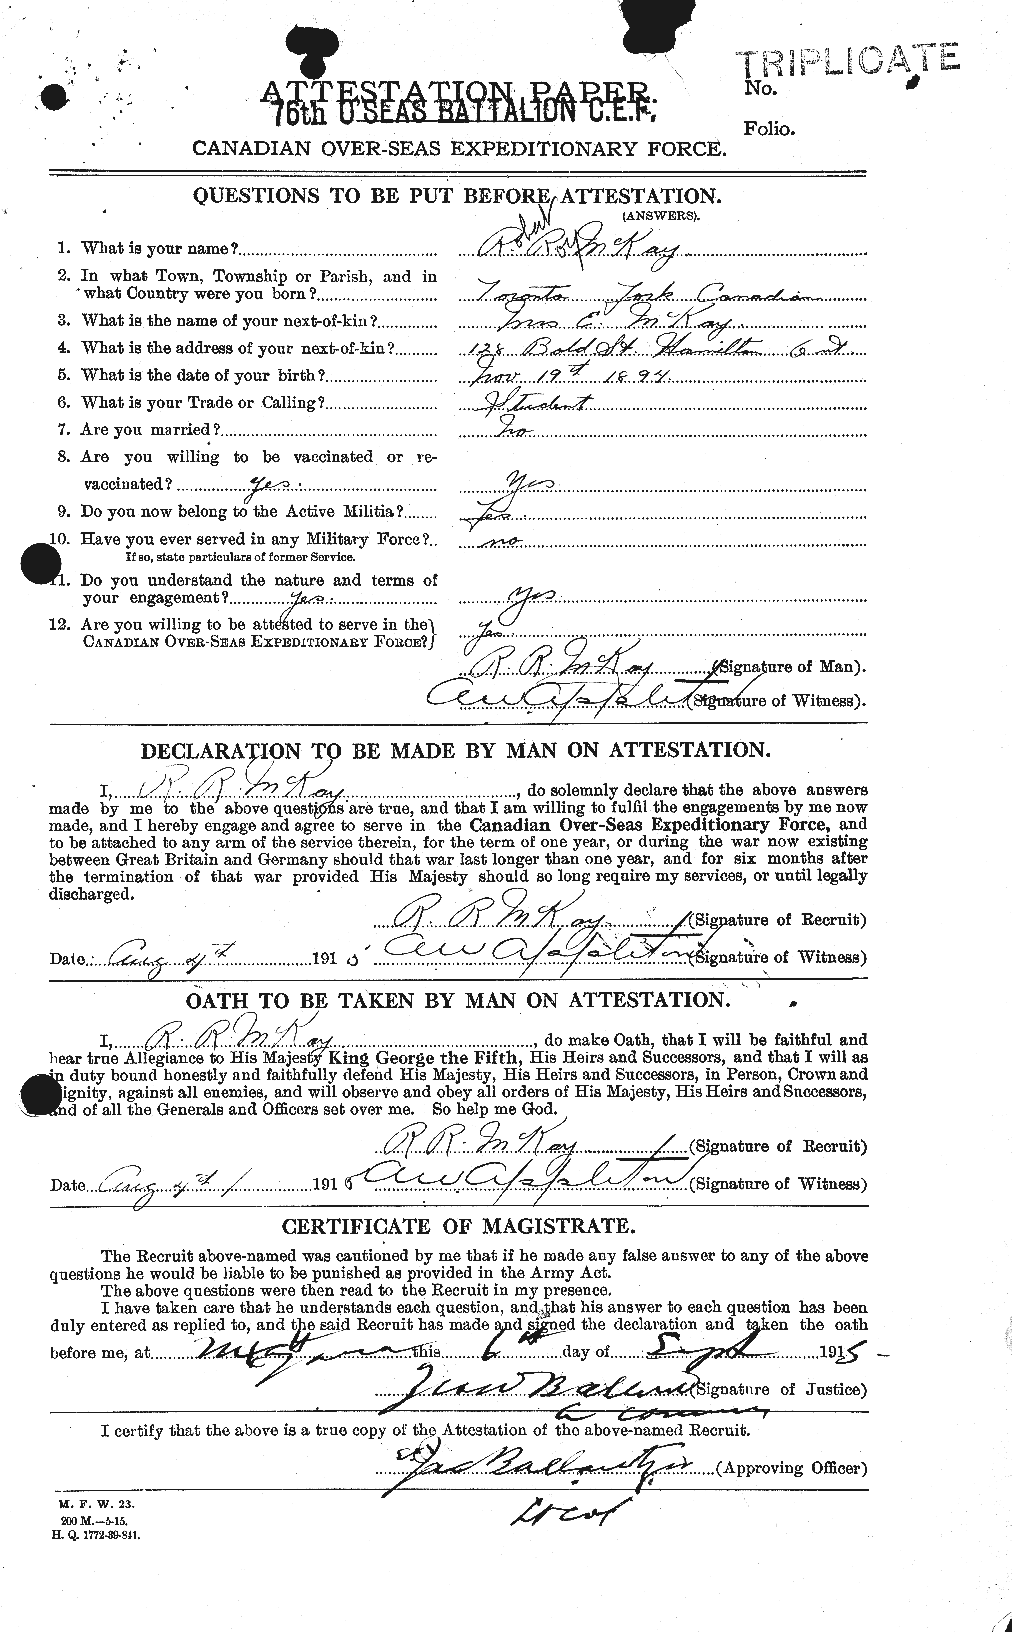 Personnel Records of the First World War - CEF 530106a